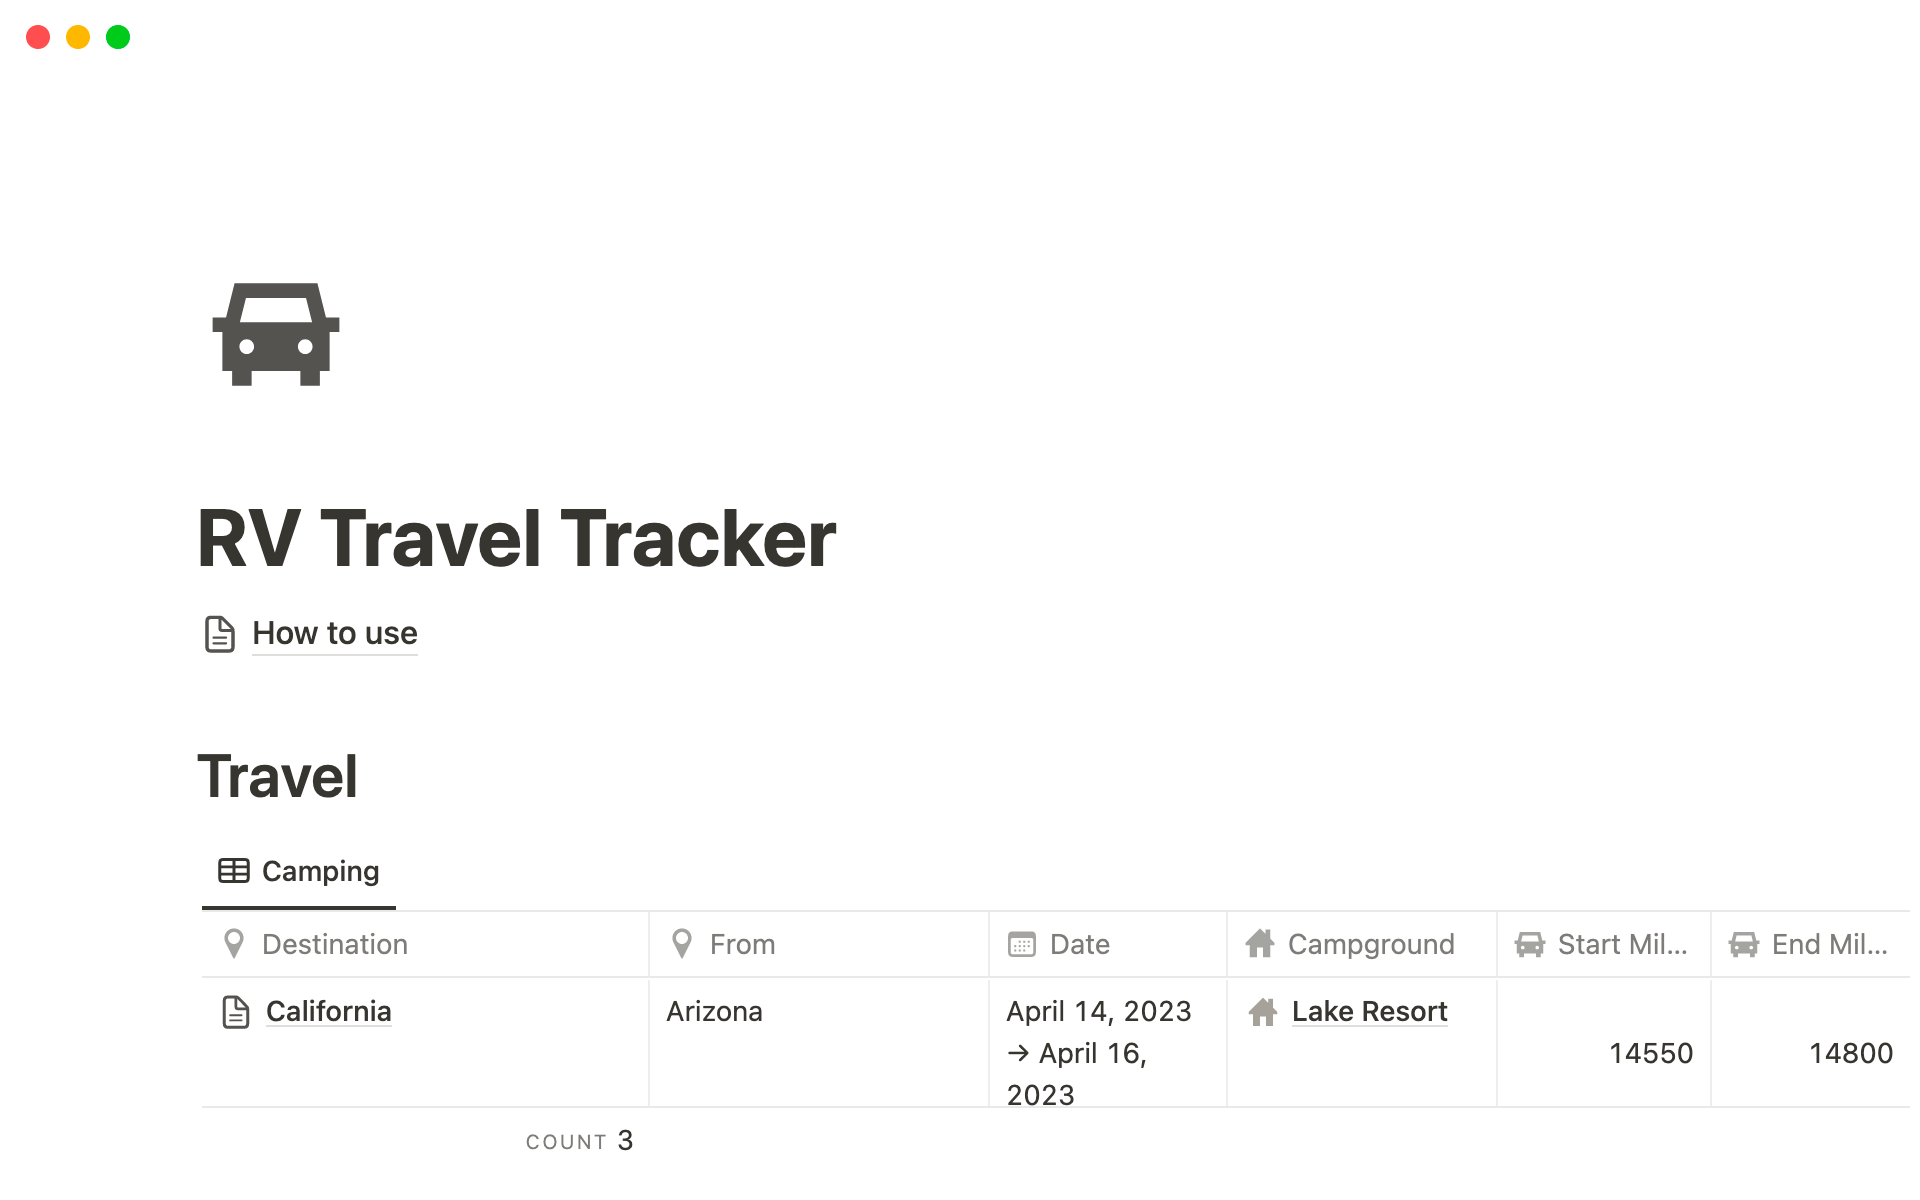 The free Notion RV Travel Tracker is the perfect tool for keeping tabs on your travel plans and camping locations.